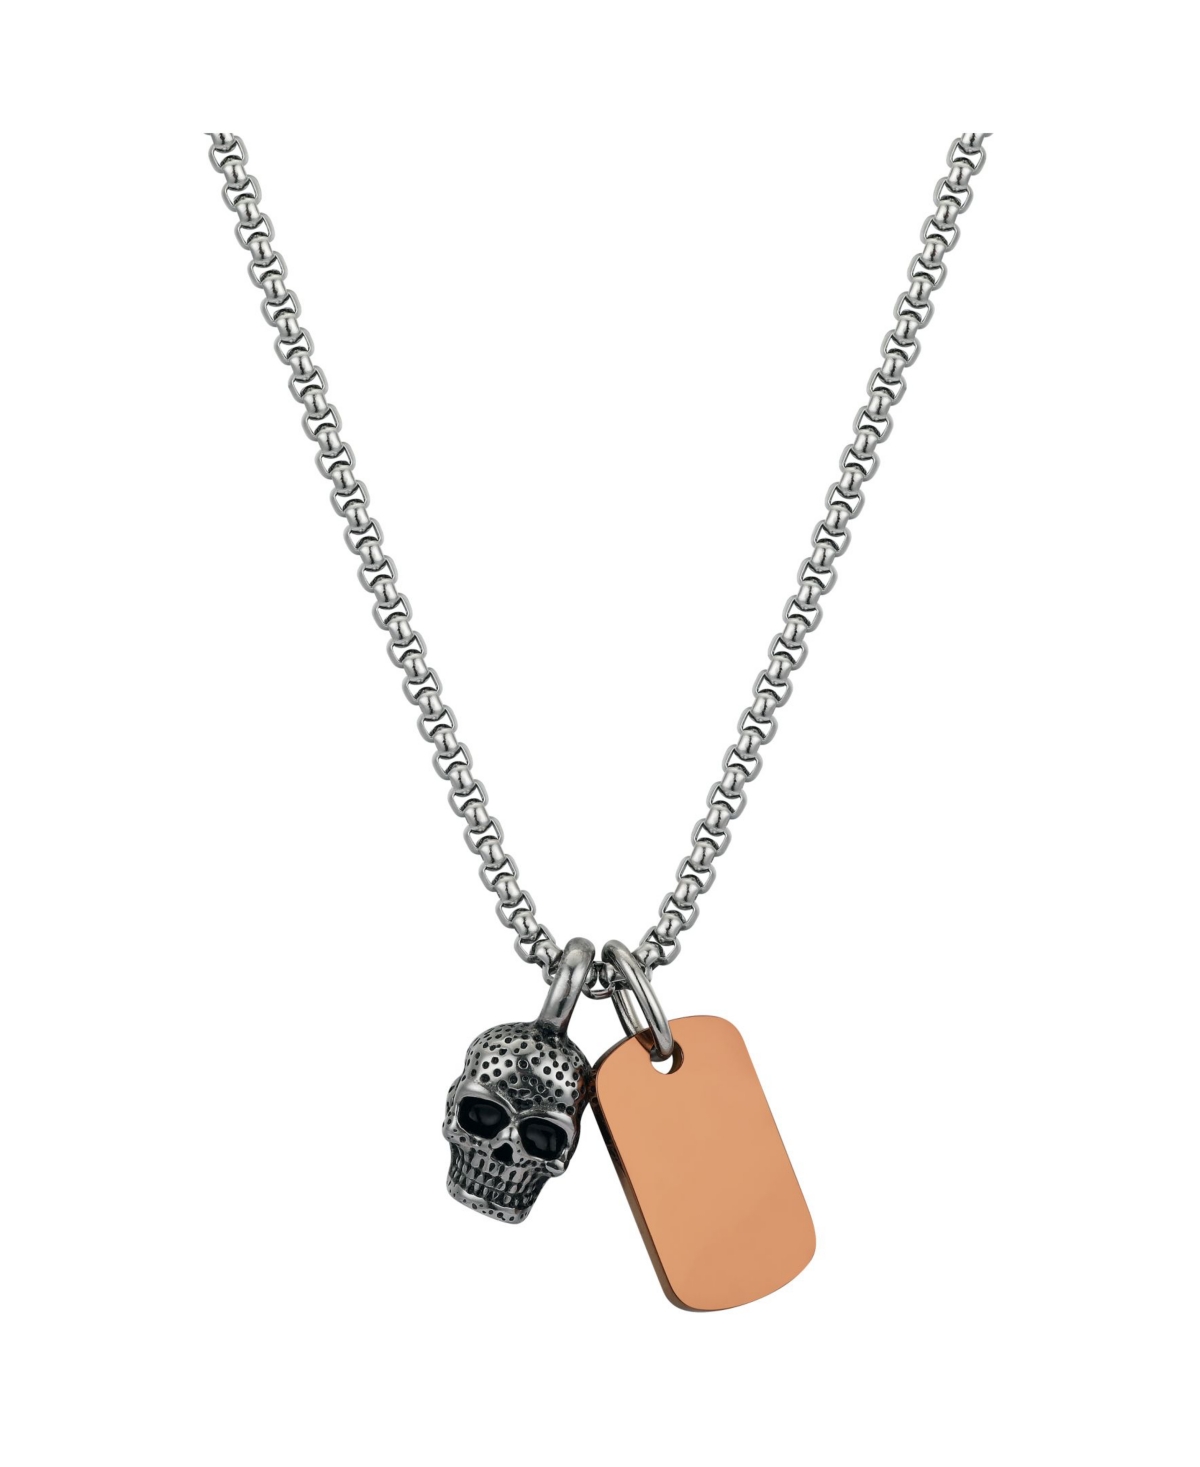 Men's Stainless Steel Skull Tag Charm Pendant Necklace - Silver-Tone